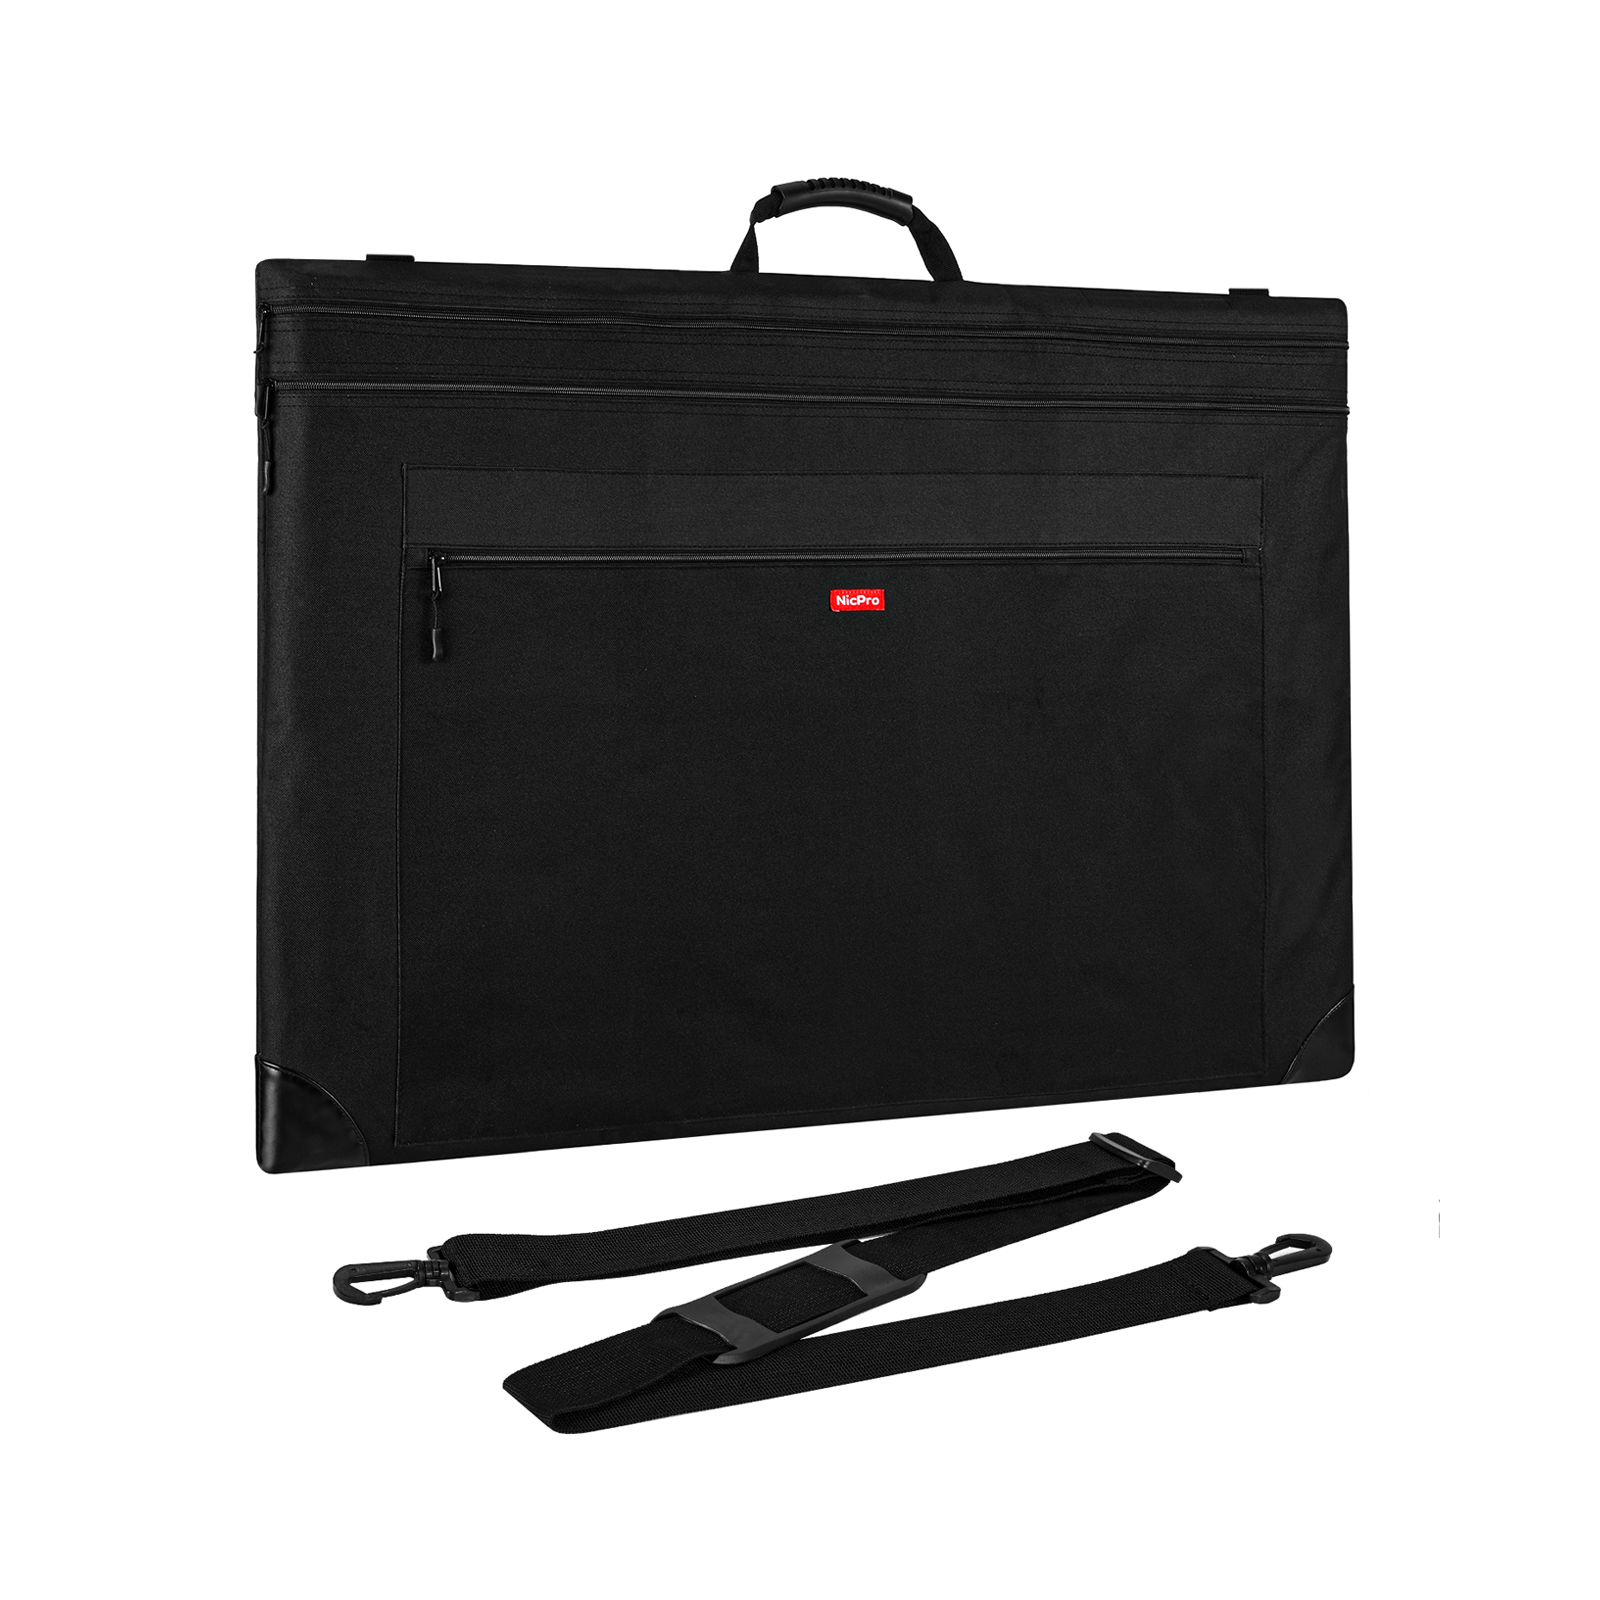 Waterproof Nylon Art Portfolio Case Art Supplies Large Capacity Multifunction Wear Resistant Painting Board Bag for Traveling Carrying Gray Large